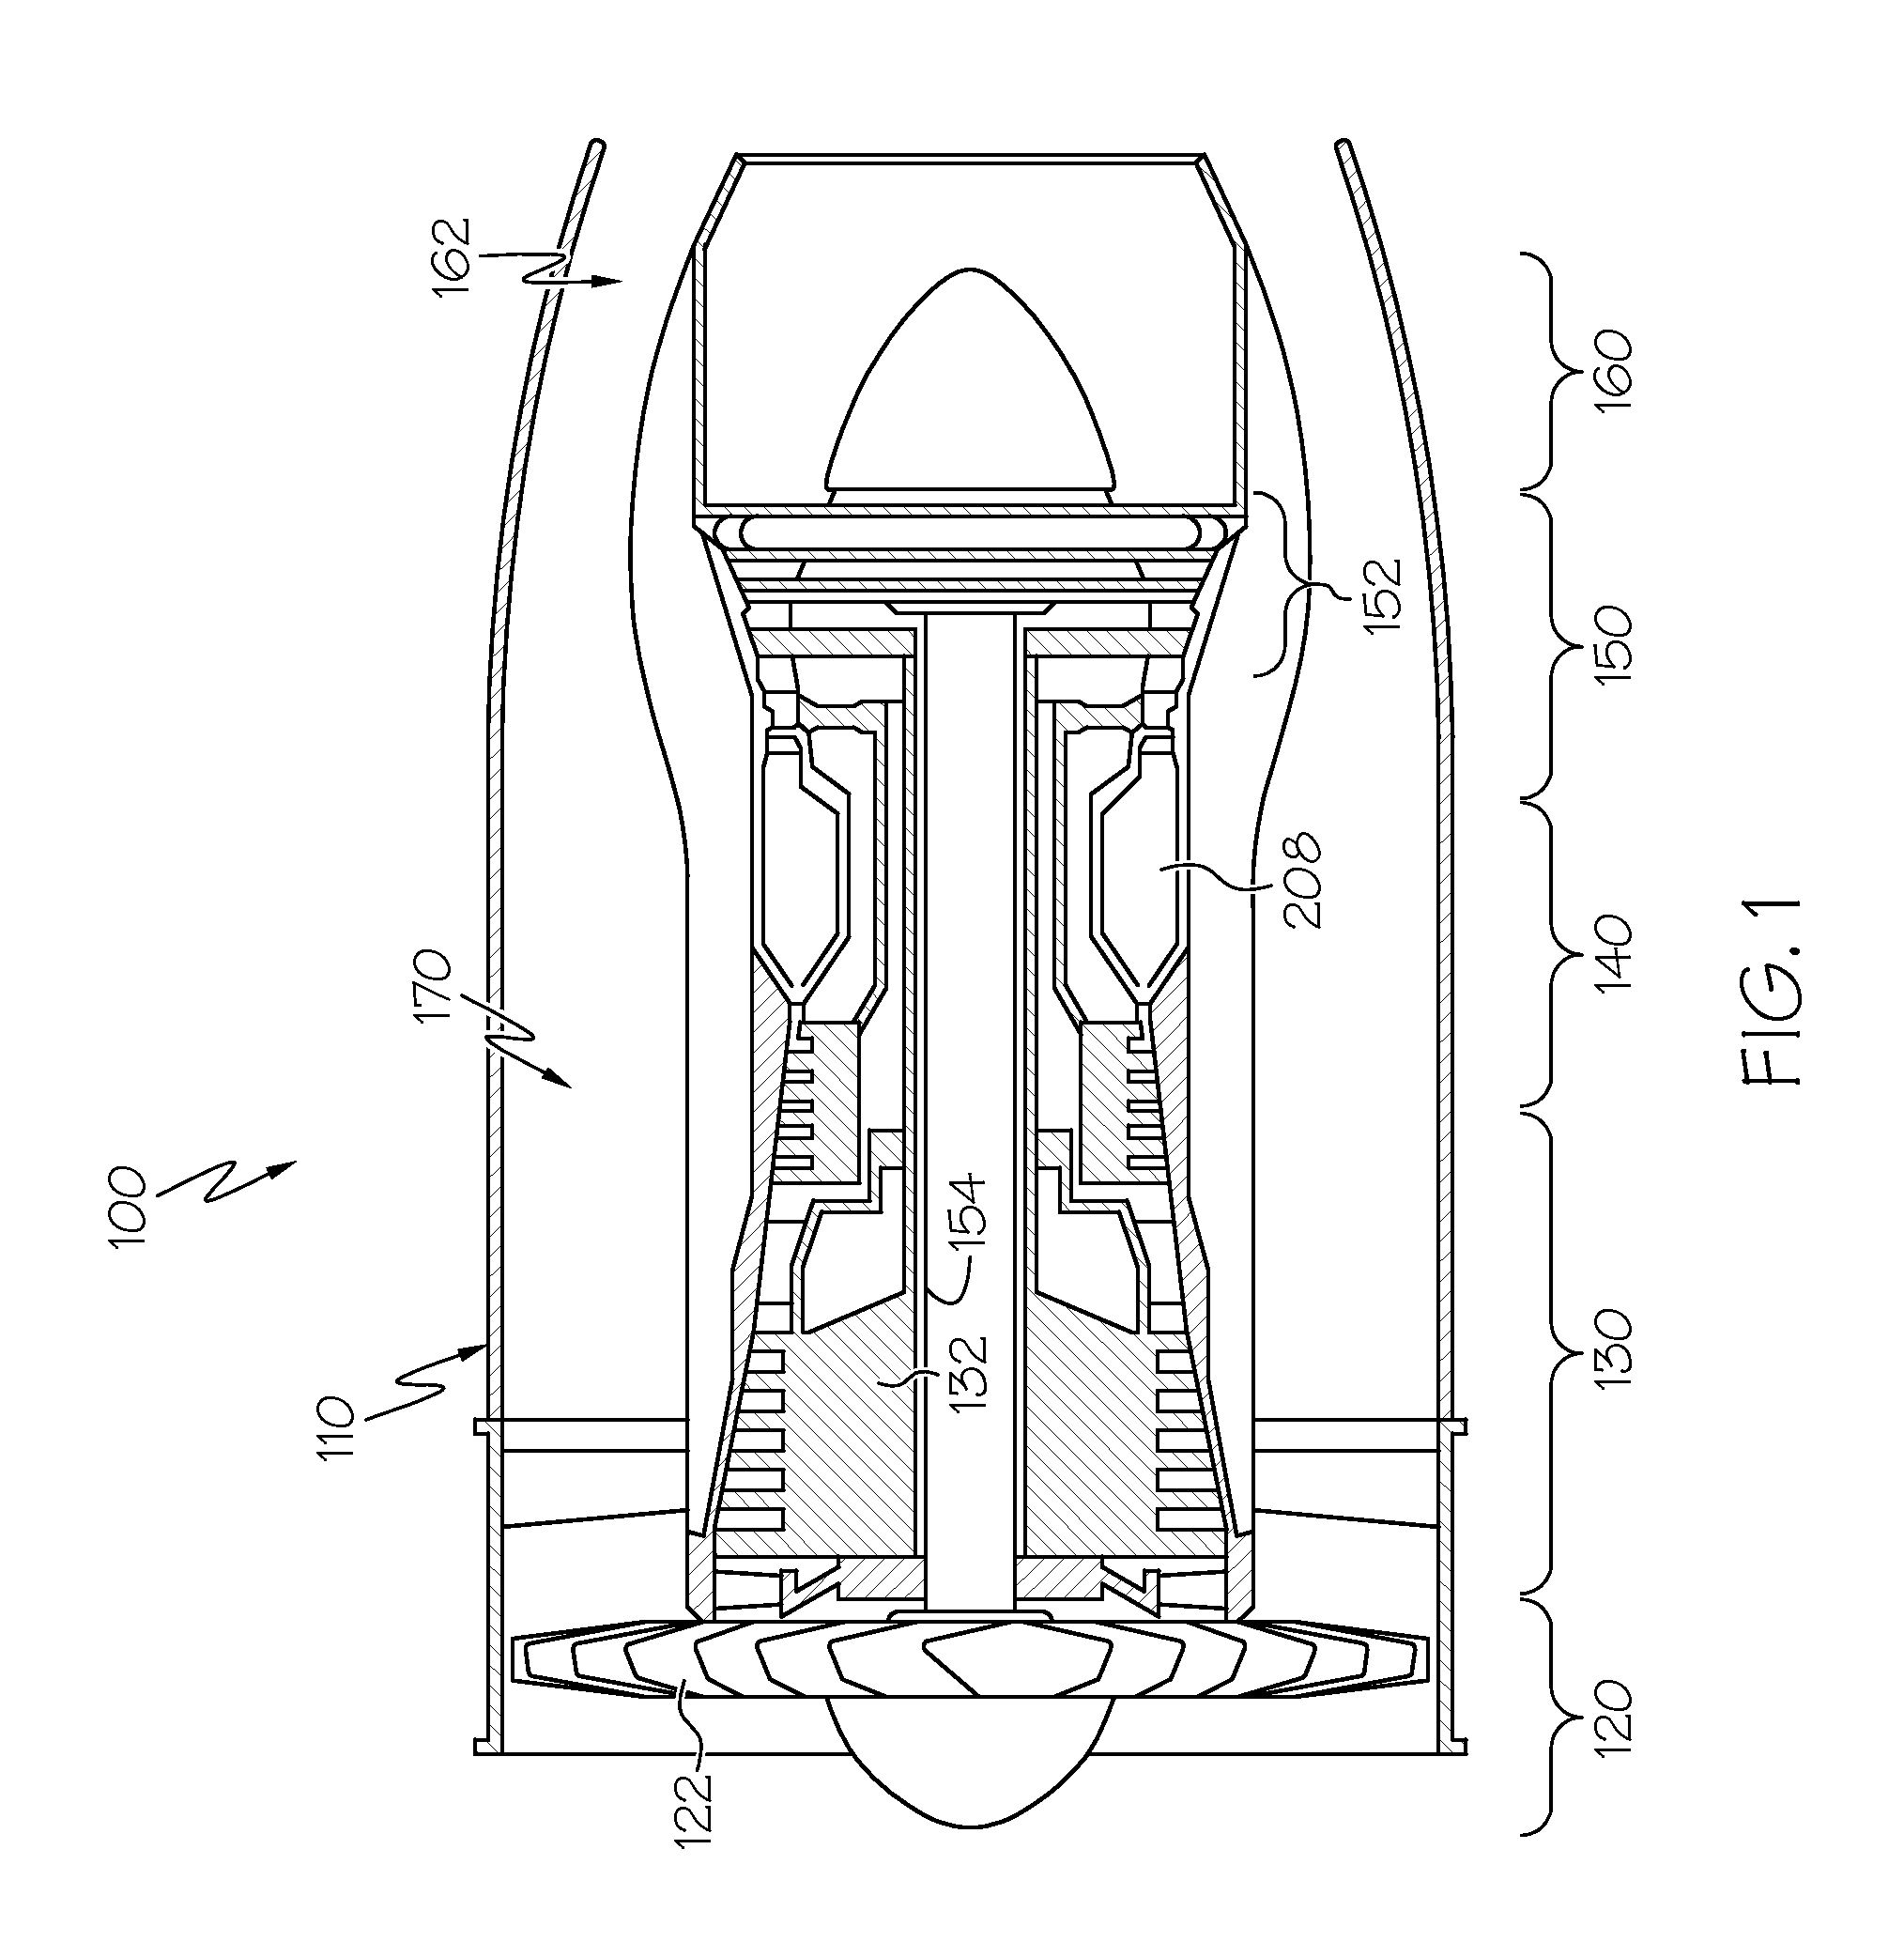 Combustion sections of gas turbine engines with convection shield assemblies